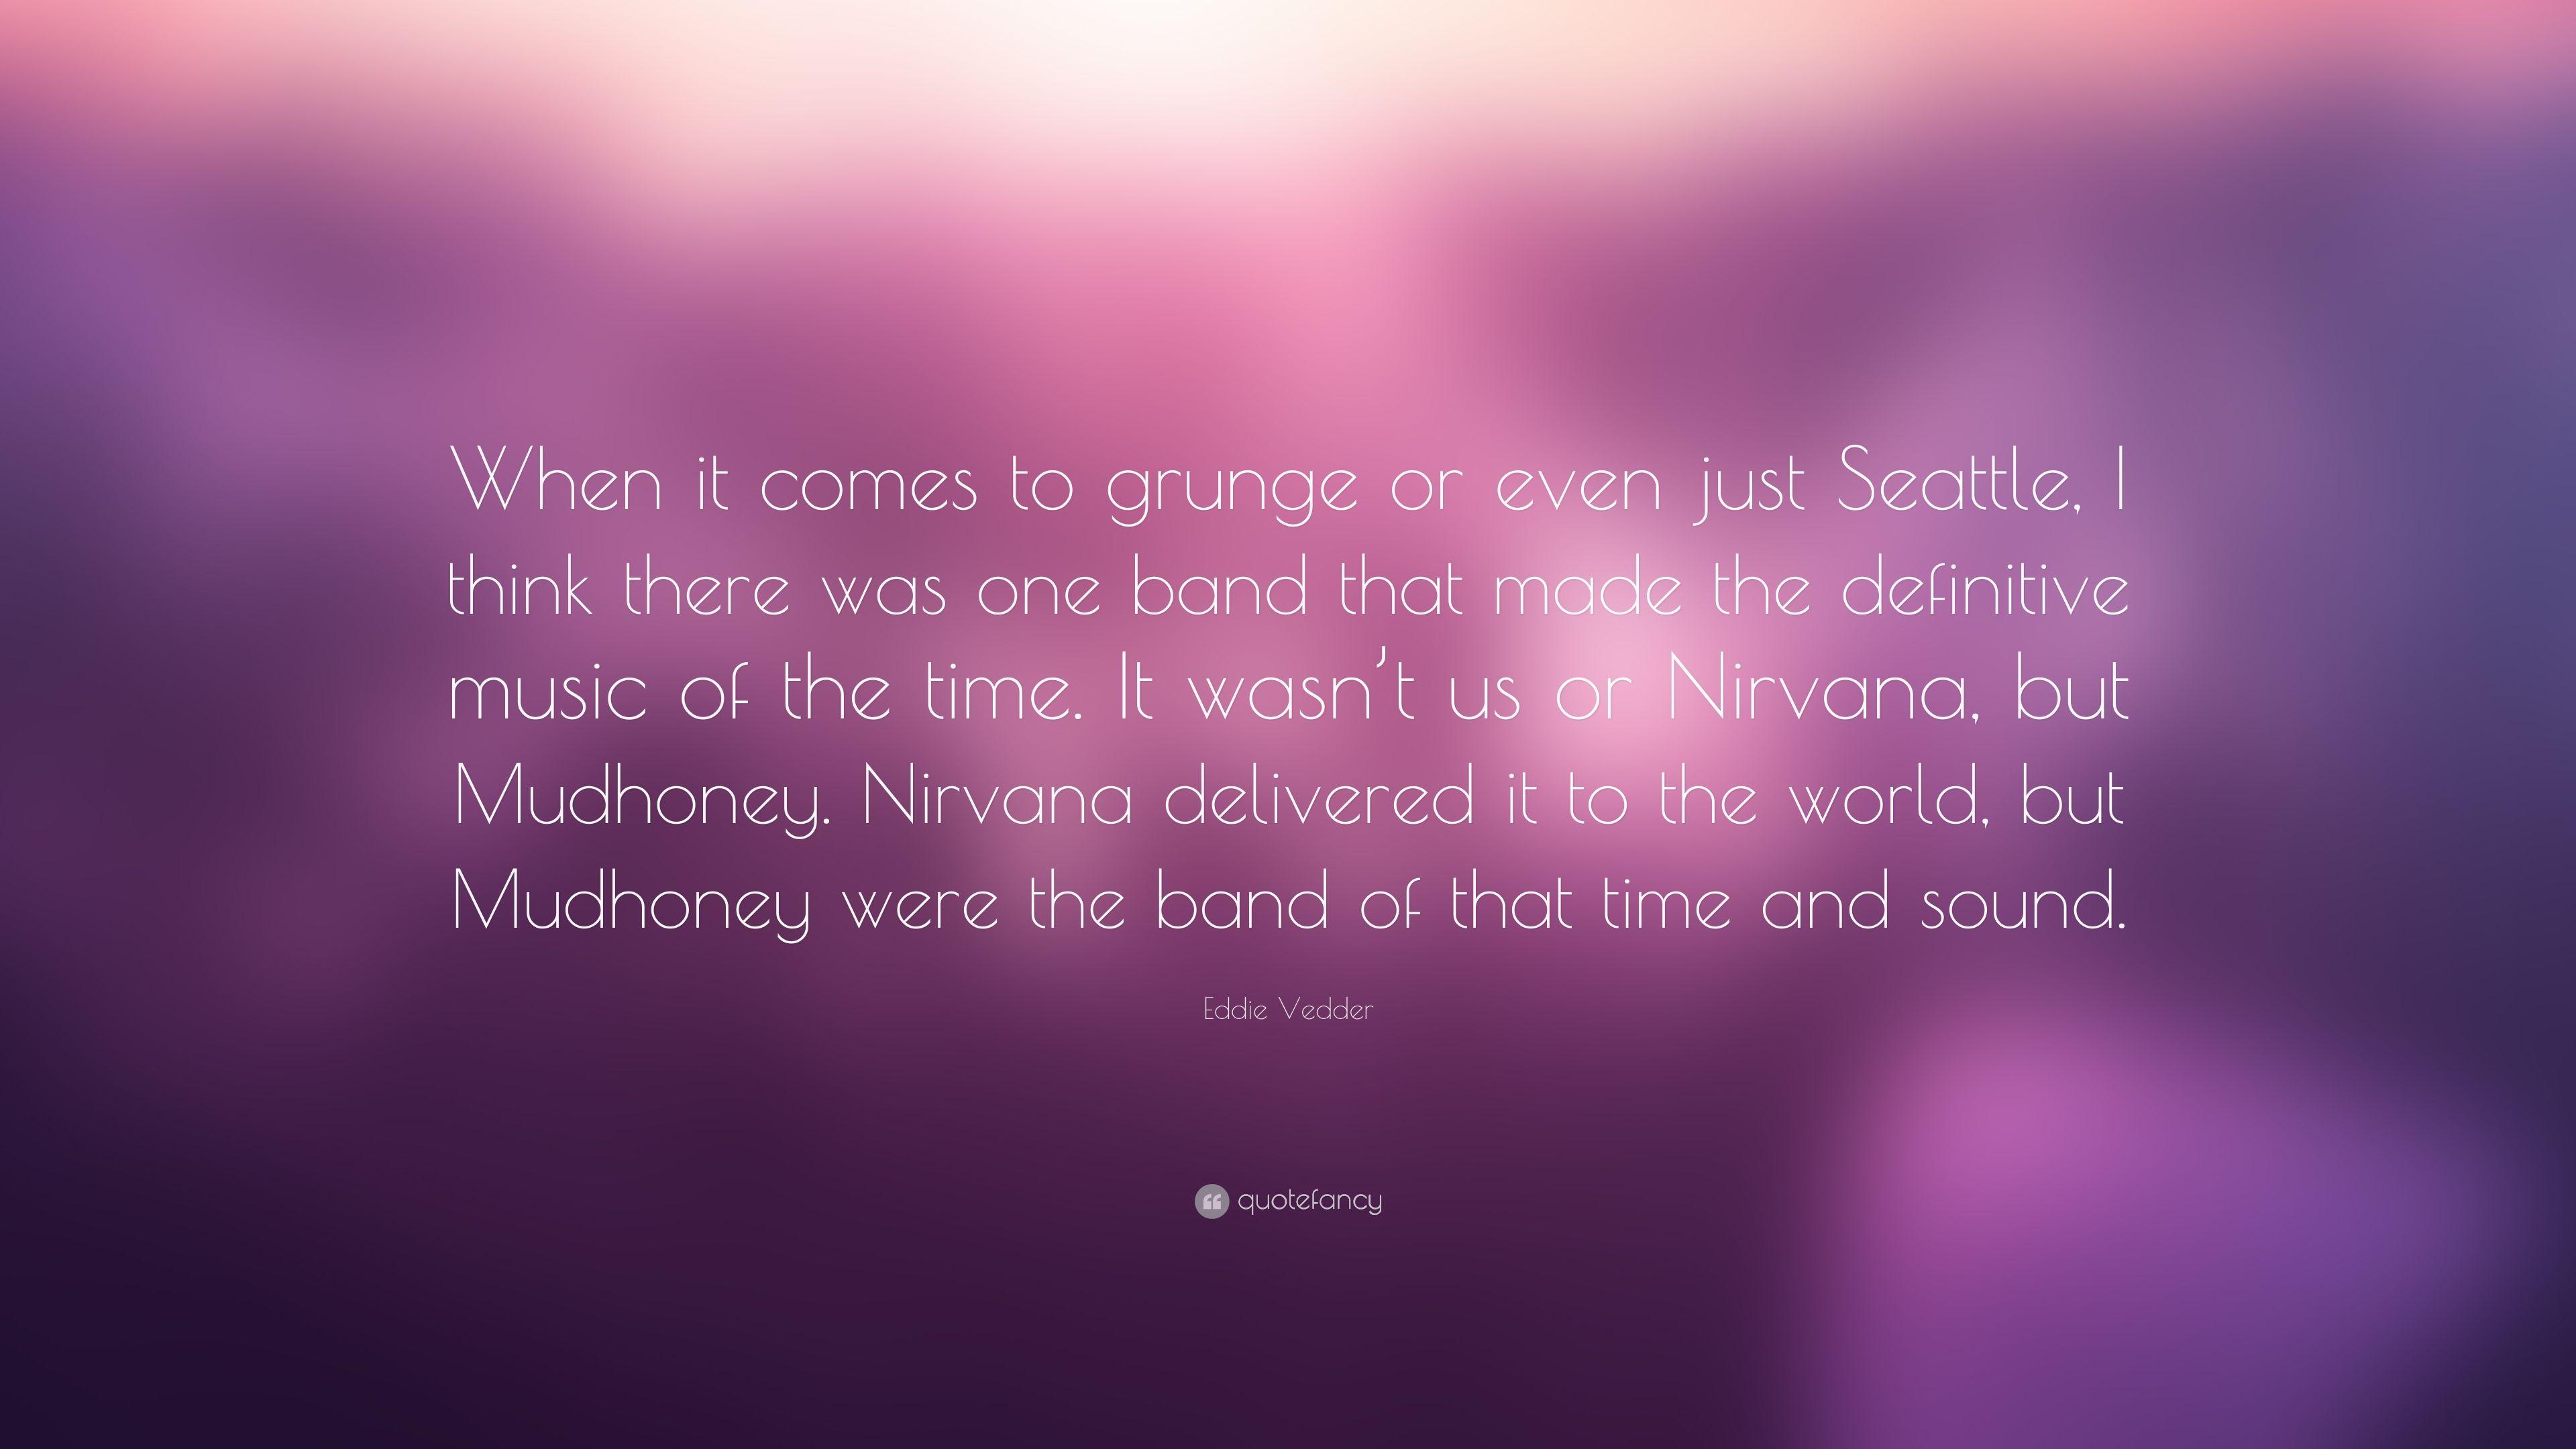 Eddie Vedder Quote: “When it comes to grunge or even just Seattle, I